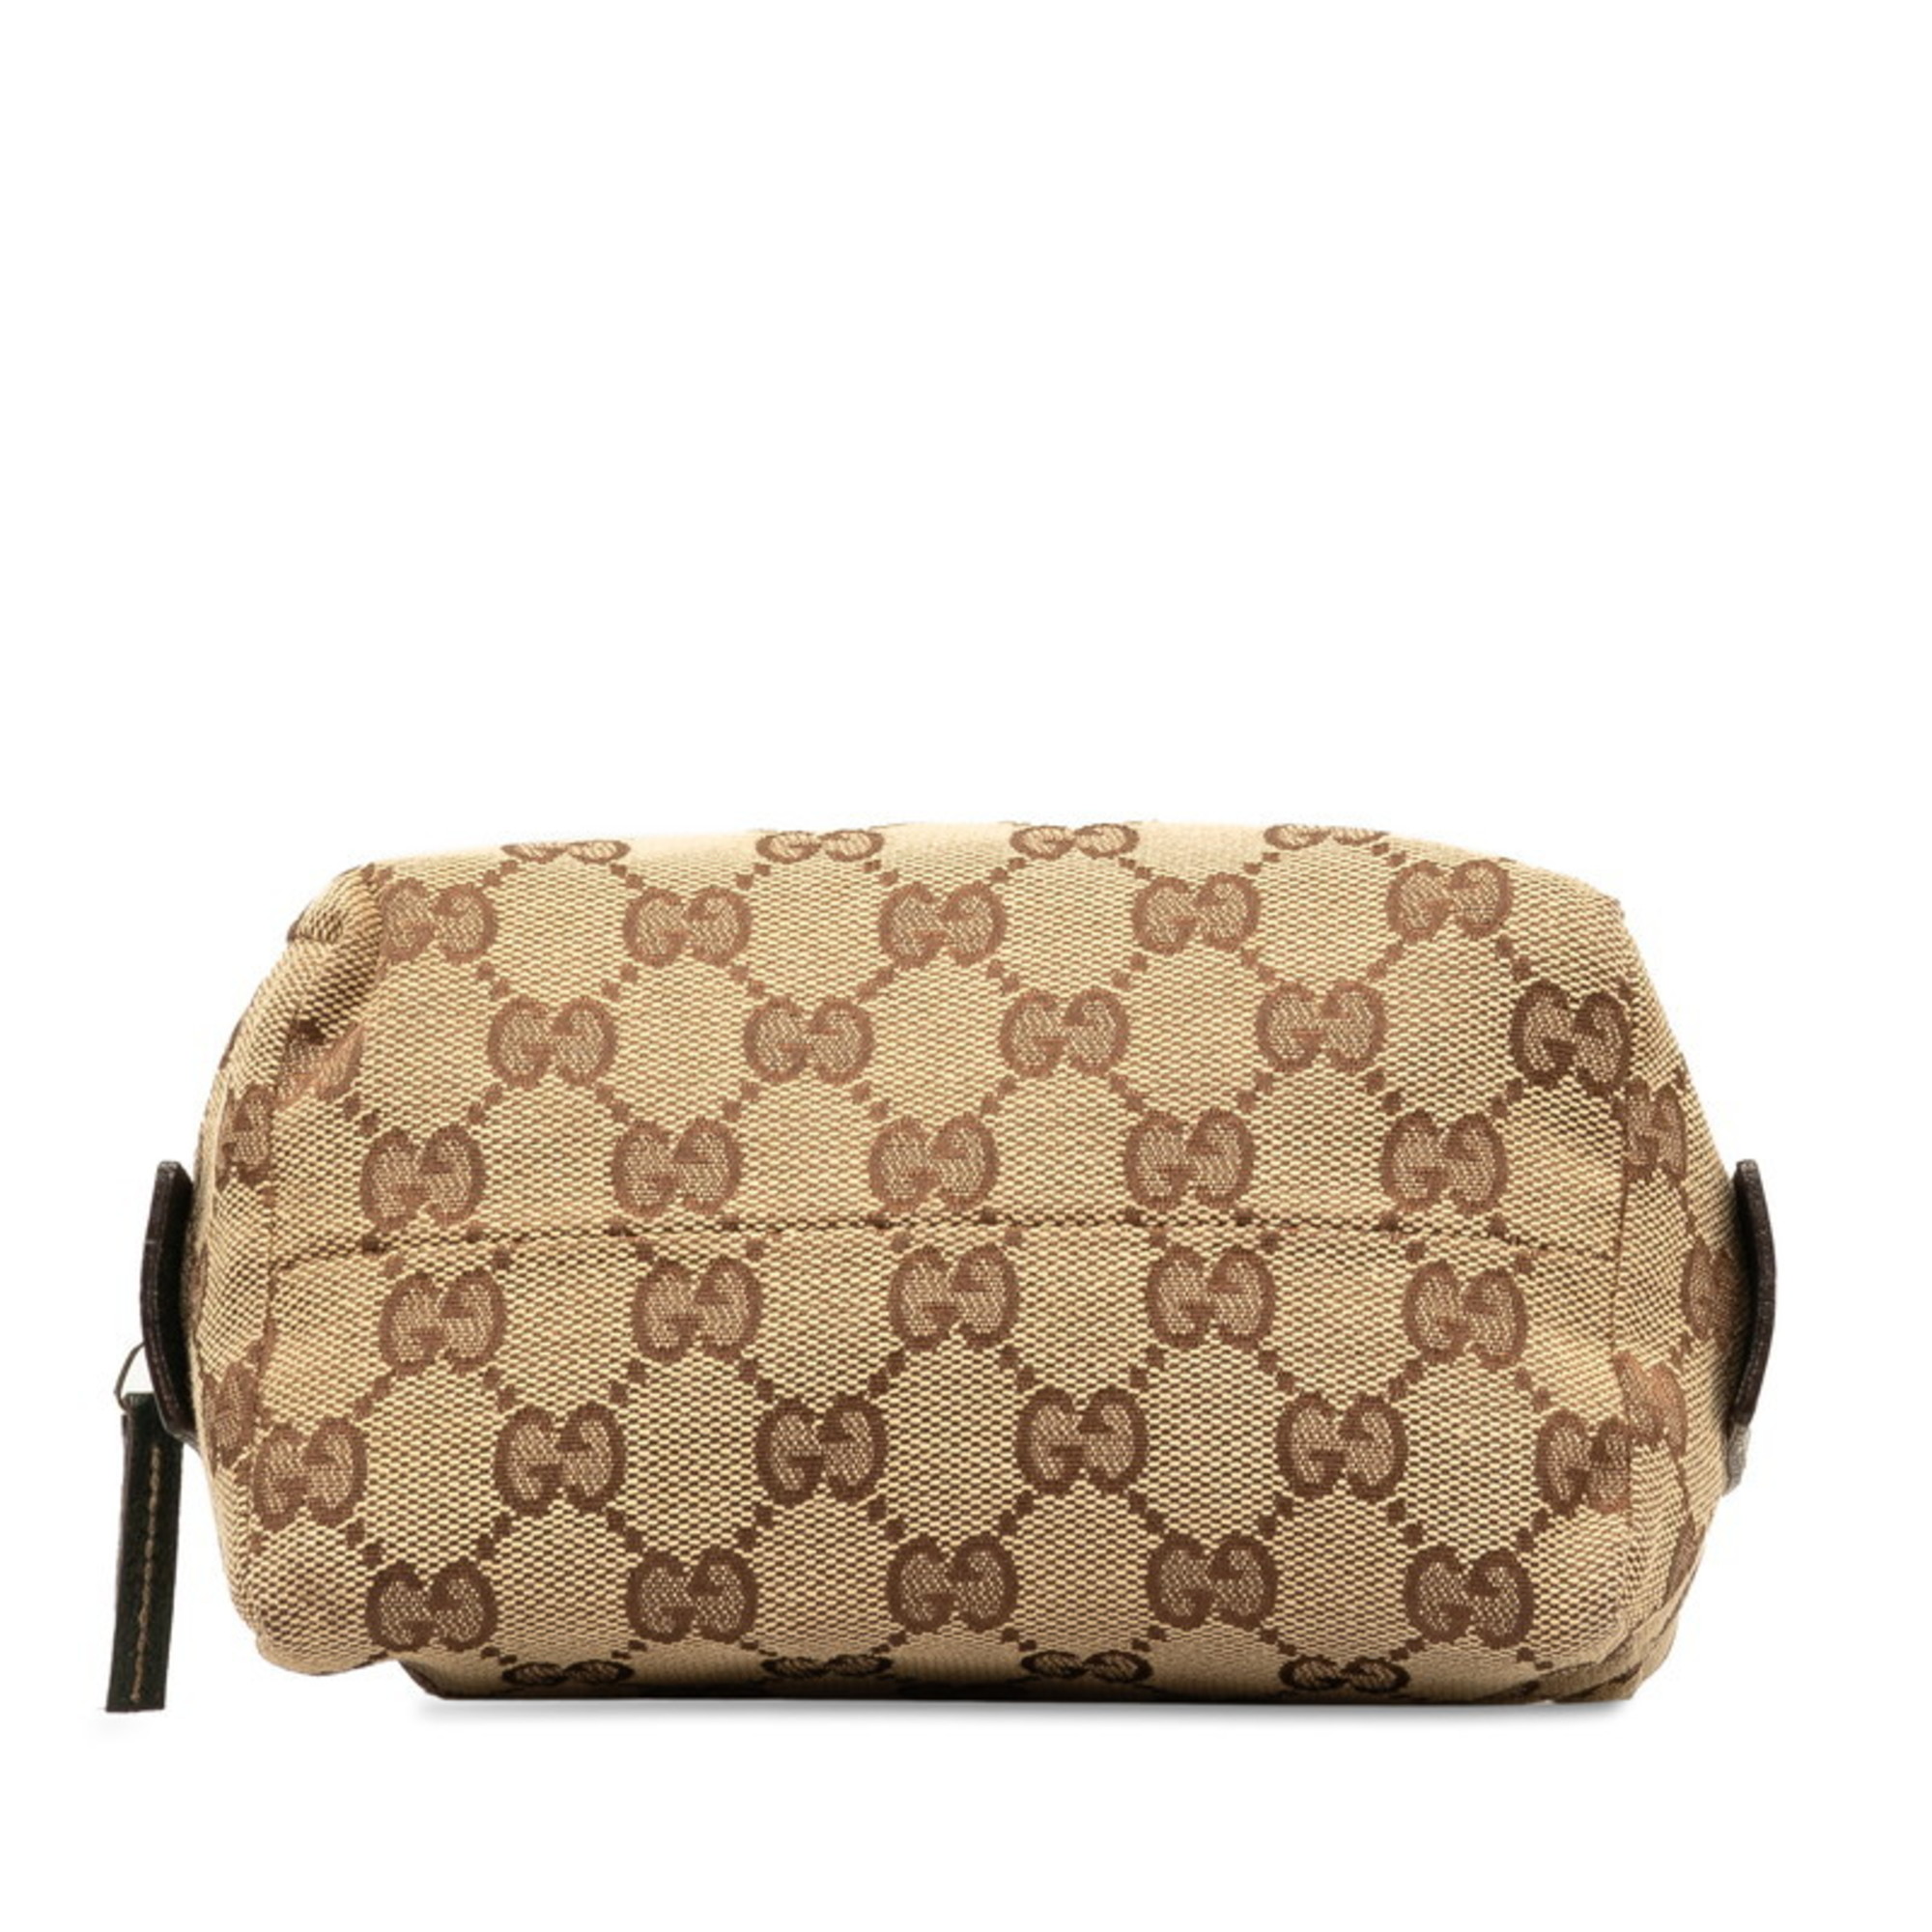 Gucci GG Canvas Pouch Beige Green Leather Women's GUCCI